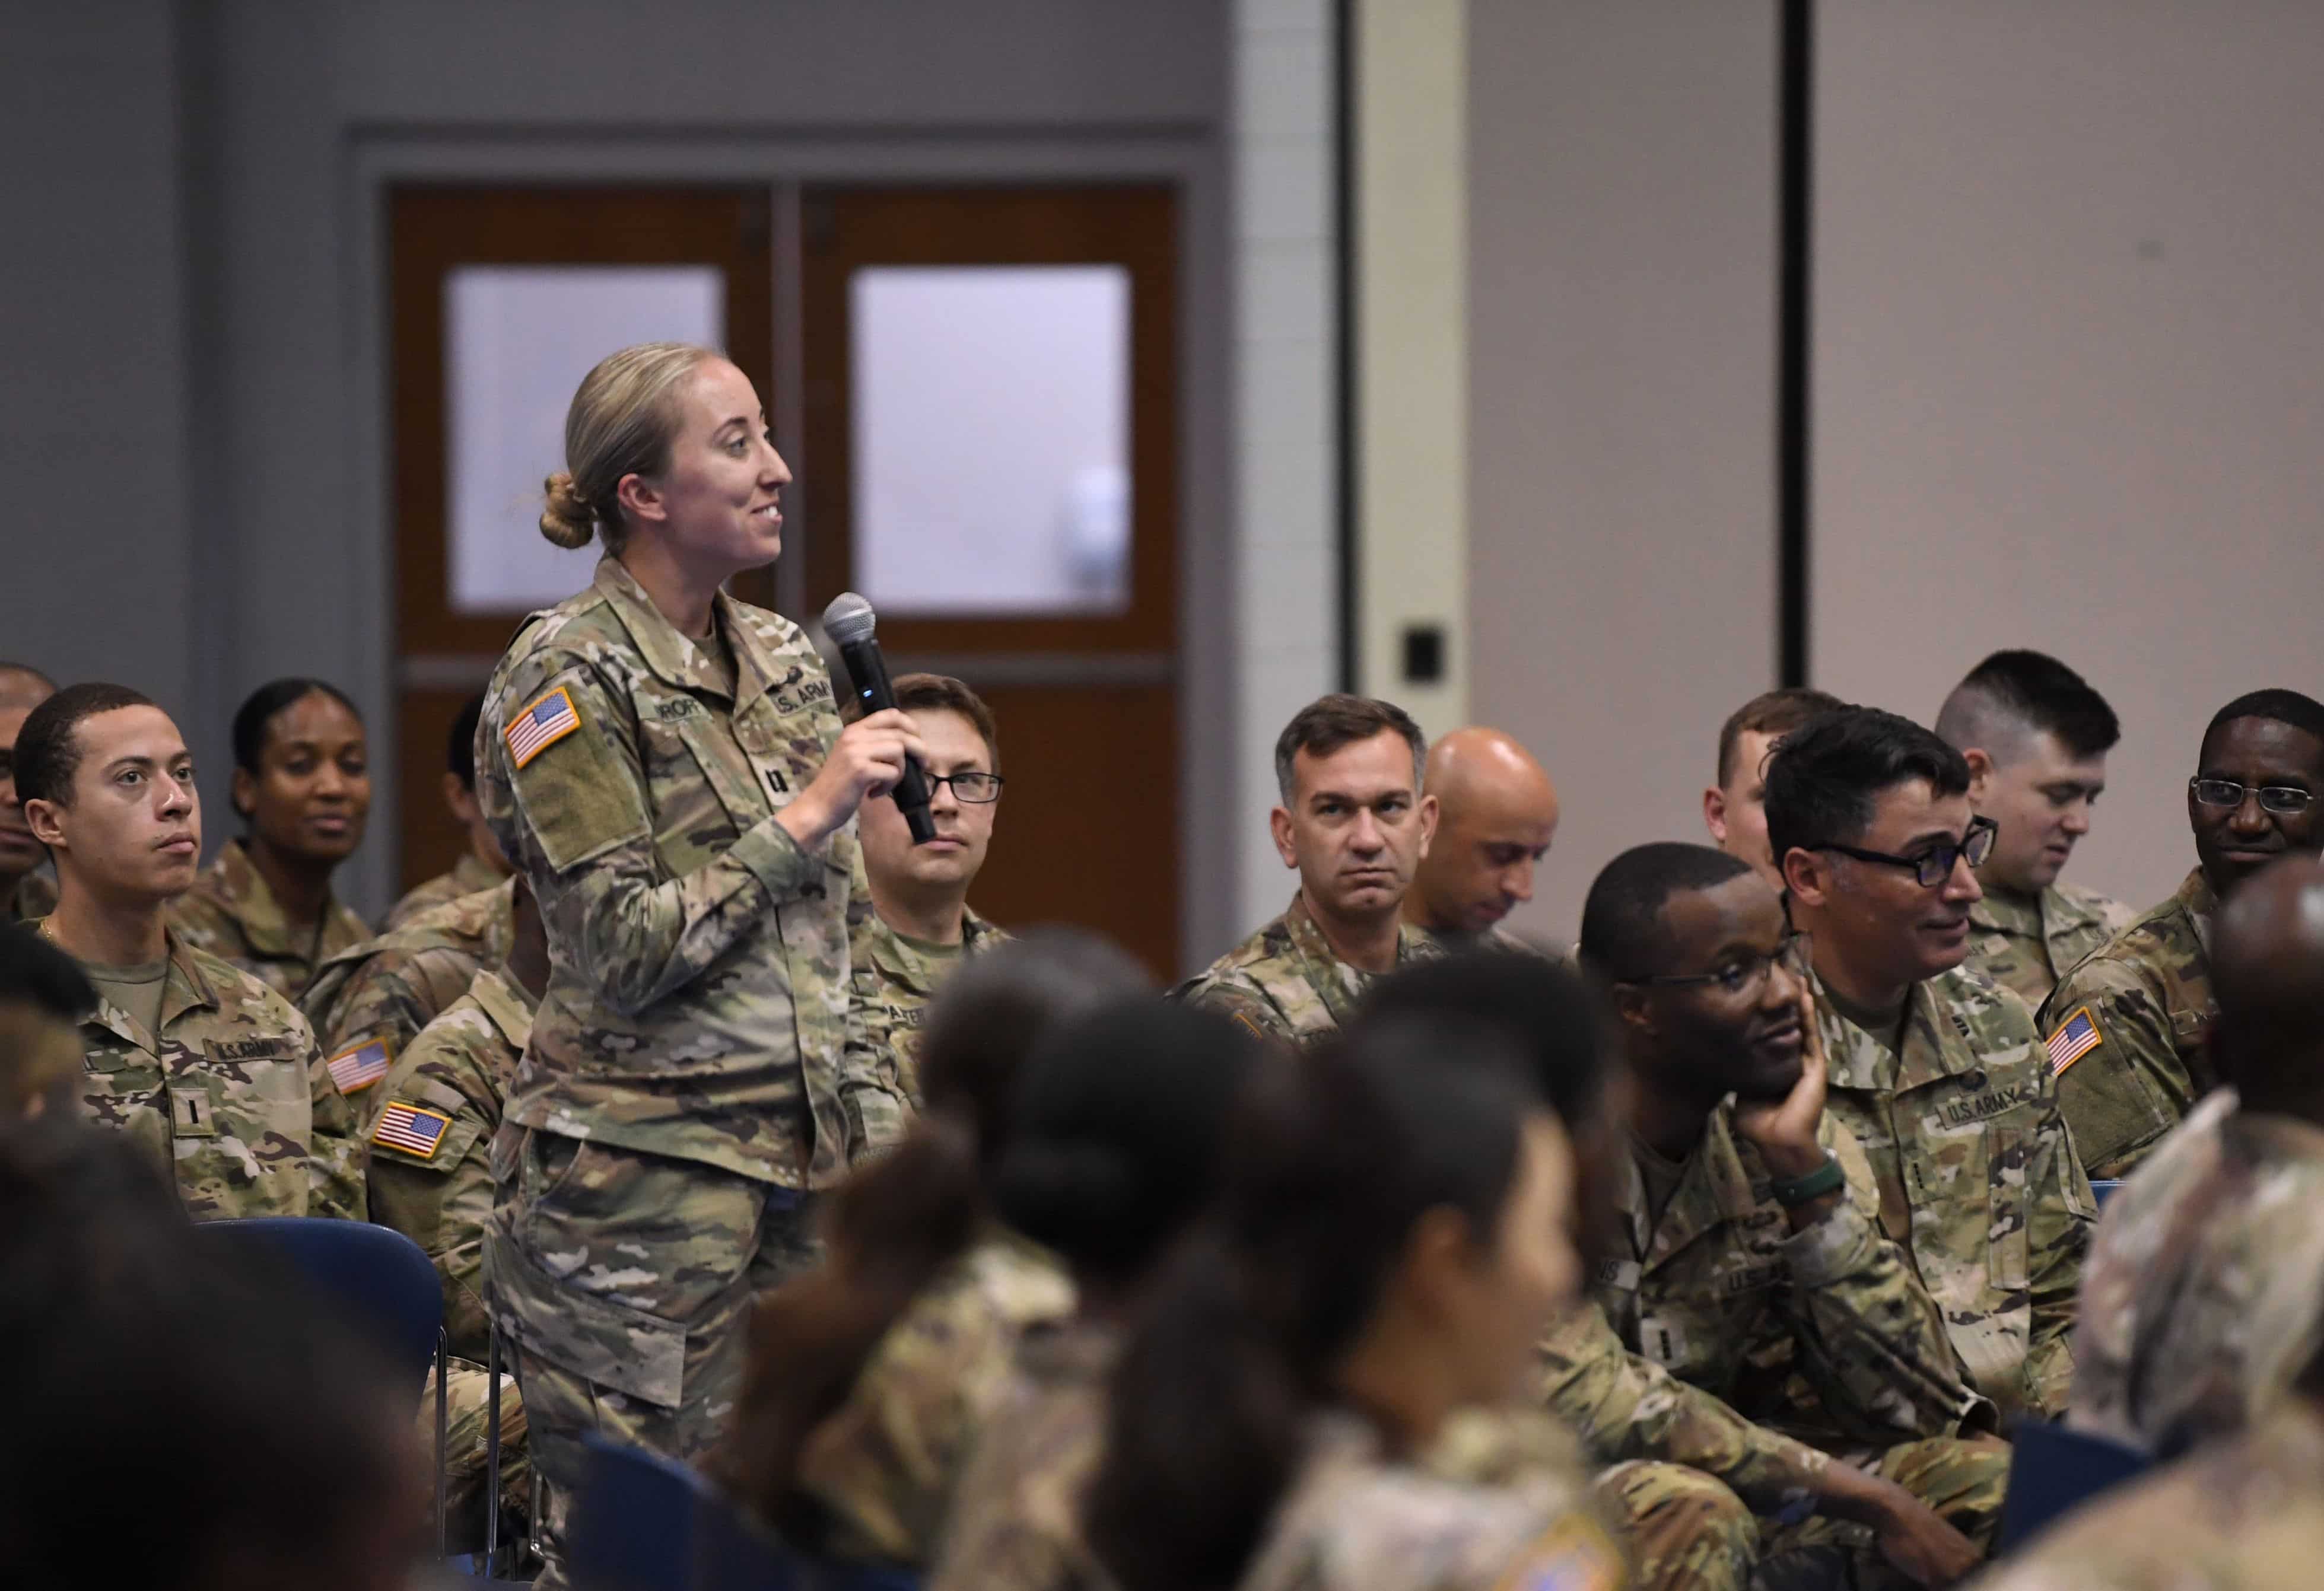 Capt. Erica Loroff, with the Soldier Support Institute, asks a question to Maj. Gen. Thomas R. Drew, commander, Army Human Resources Command, during Drew’s lecture, Aug. 15.